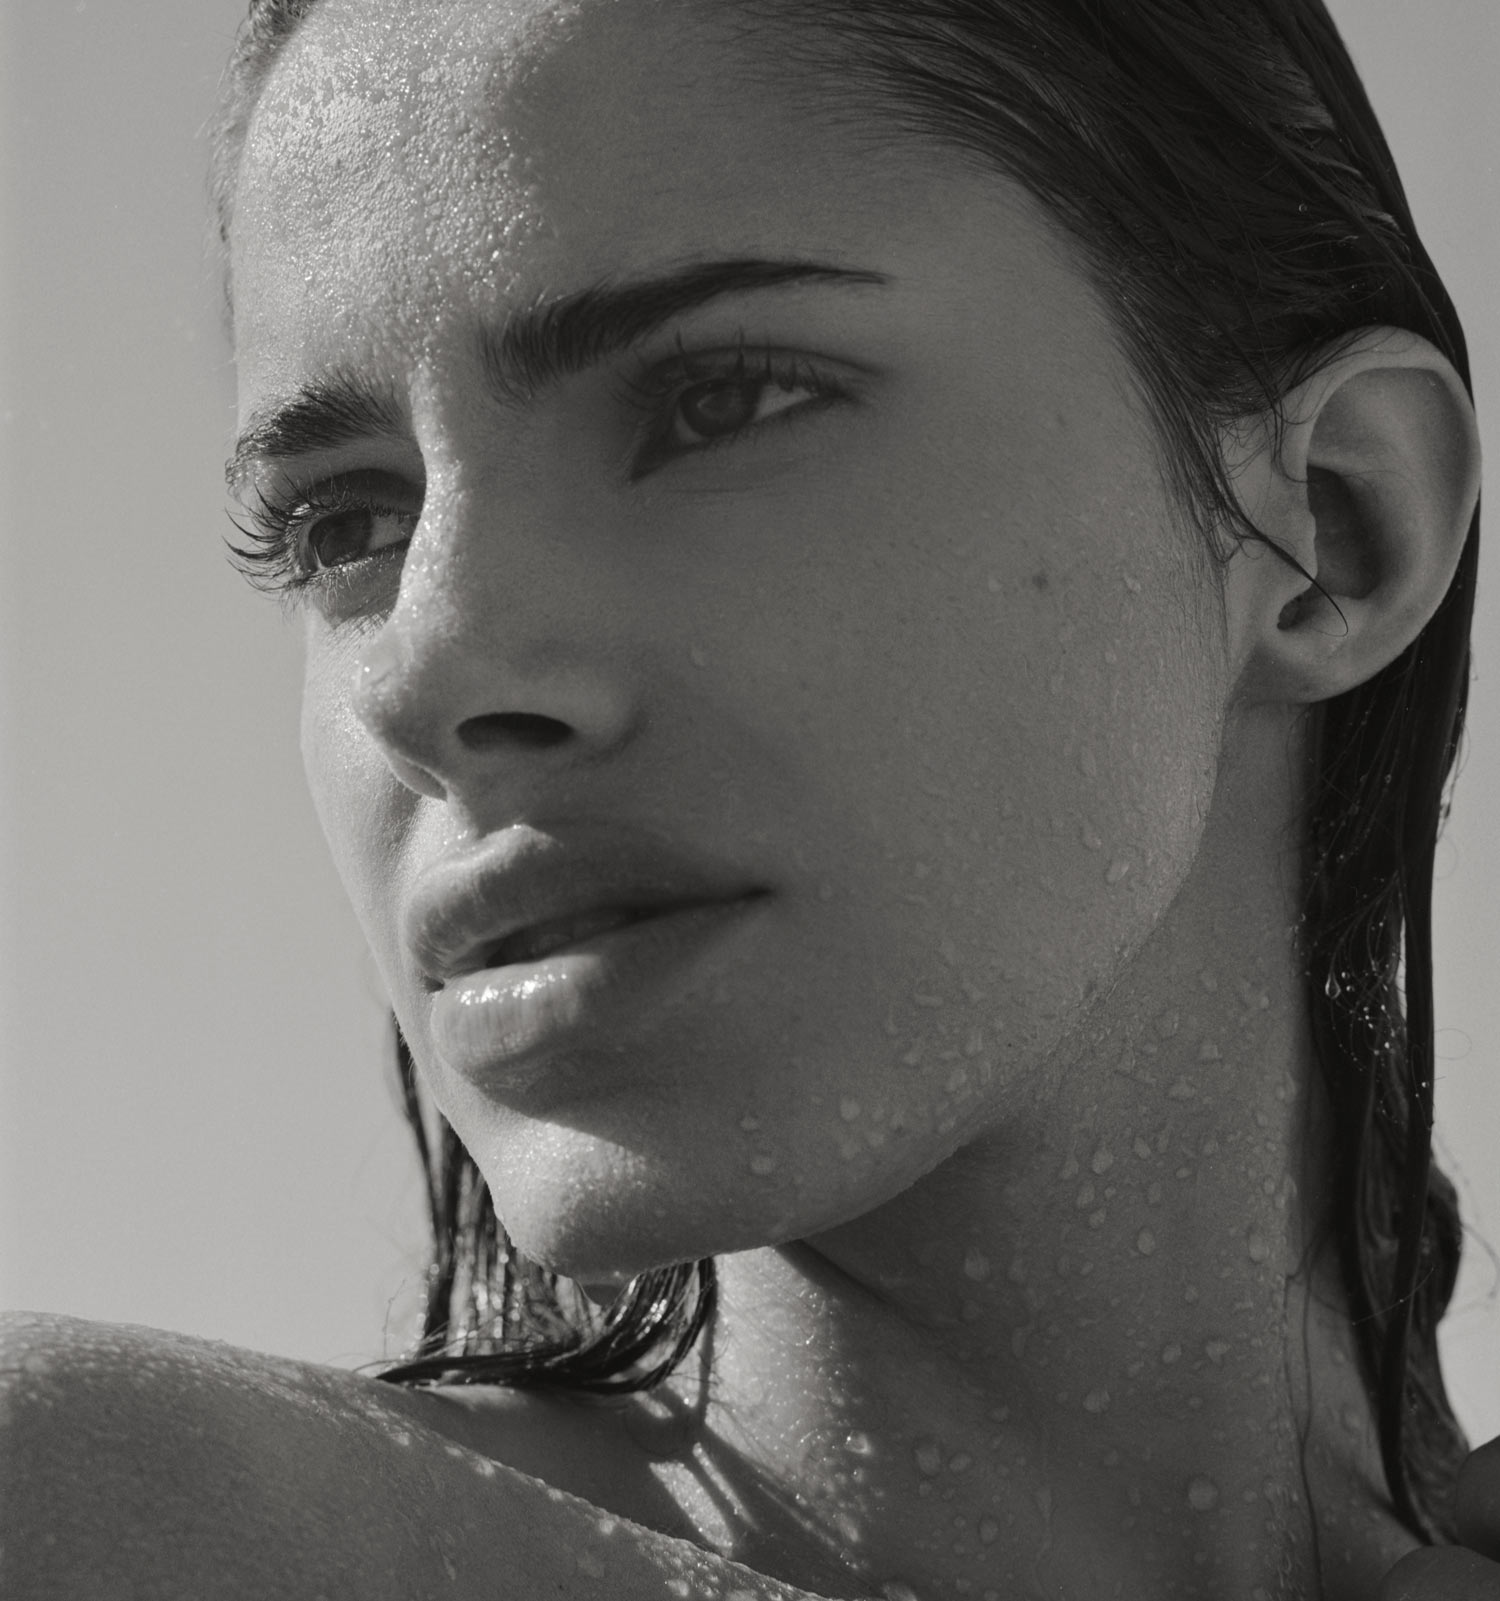 Black and white photo of female model Carmin Valencia on a New Jersey beach, her hair is wet, water droplets on her face and body. Photographed by New York photographer Maria Bruun. Mamiya RZ67 camera and Ilford film. "High Tide" Fashion editorial for Nasty Magazine.